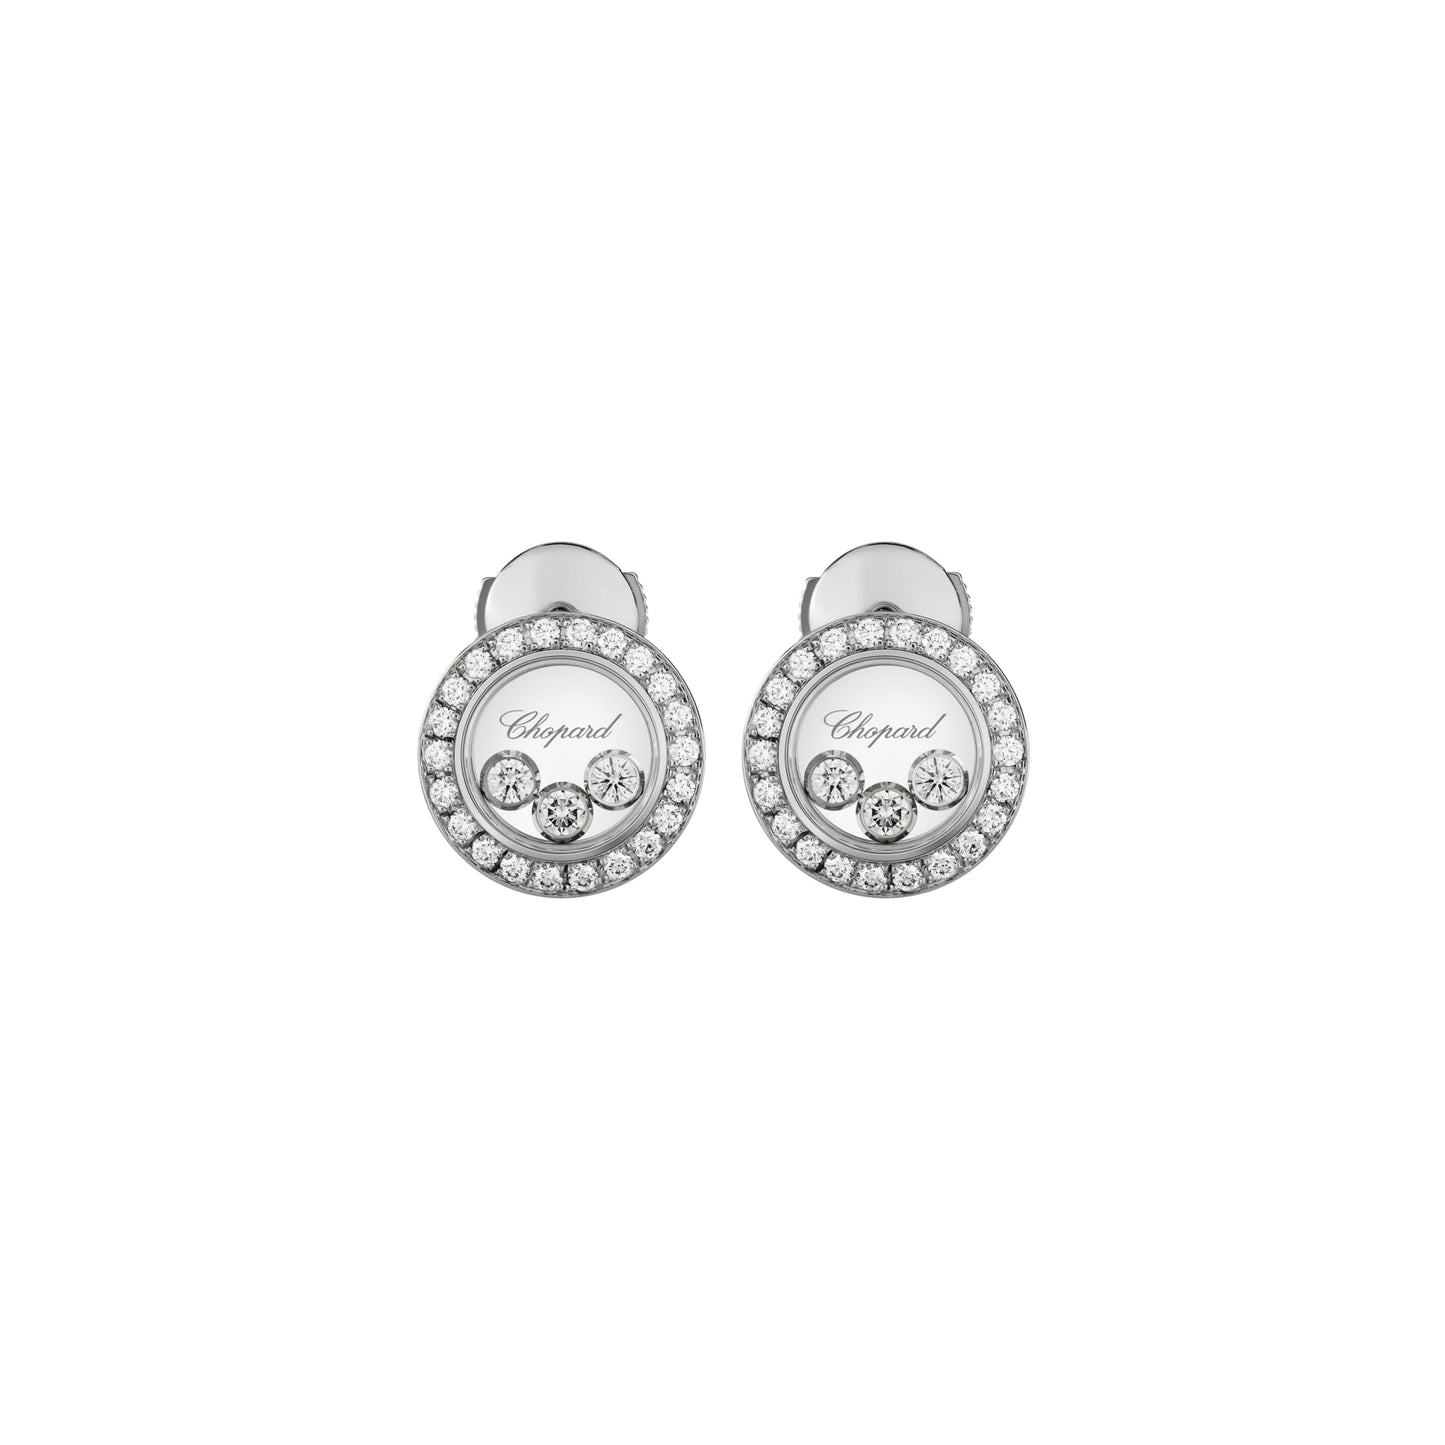 HAPPY DIAMONDS ICONS EARRINGS, ETHICAL WHITE GOLD, DIAMONDS 83A018-1201